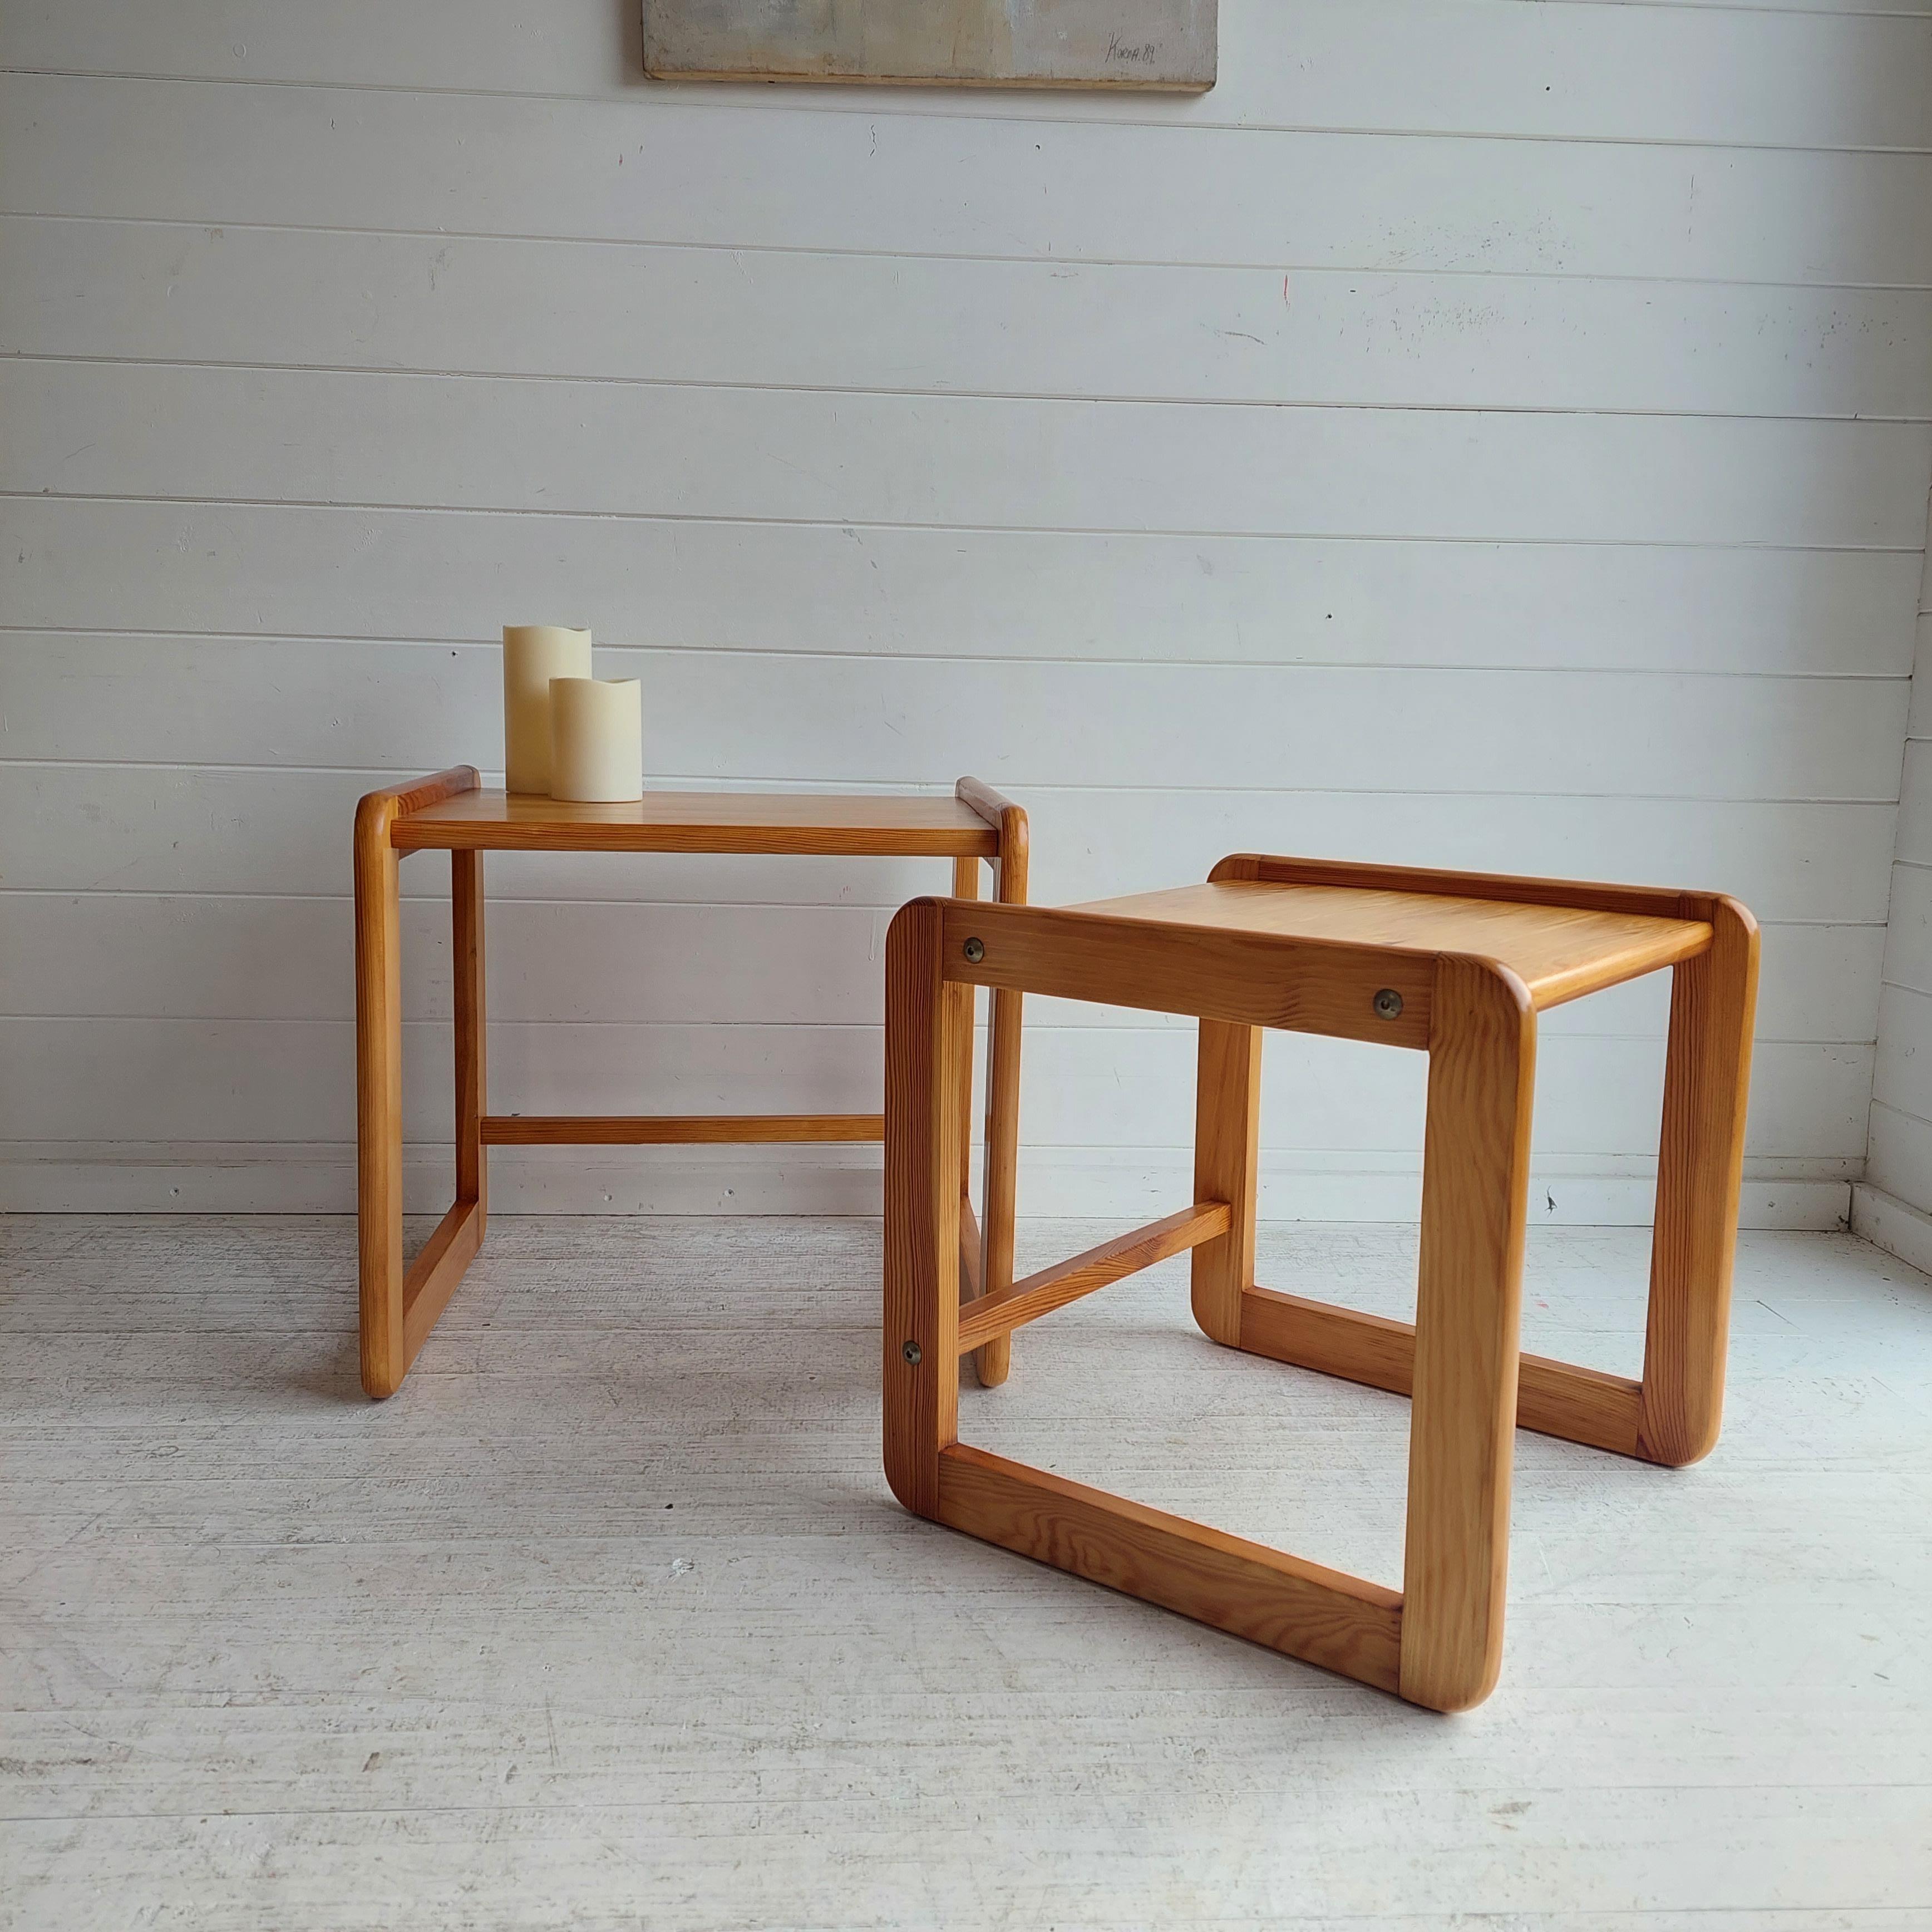 Scandinavian nesting tables in pine from the 70s

1970s, Danish design, minimalist, modernist, mid century modern design
Nesting tables, set of 2 side tables, coffee table
Solid pine
Nordic construction with the squared off frame with rounded